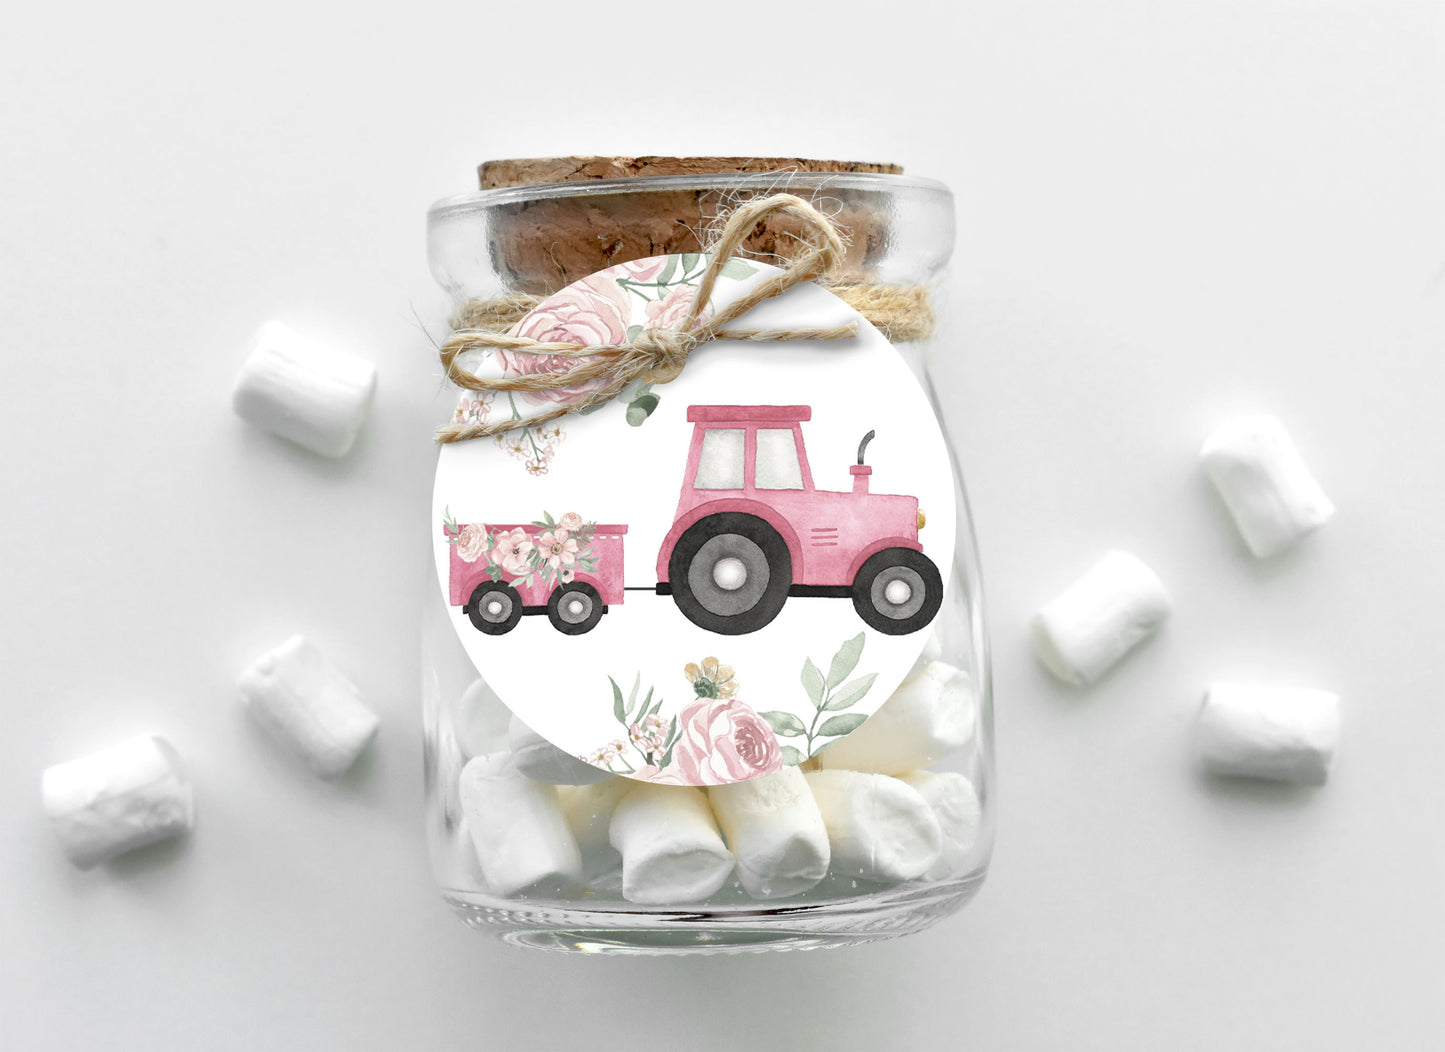 Floral Farm Cupcake Toppers | Girl Barnyard Themed Party Cupcake Picks - 11A